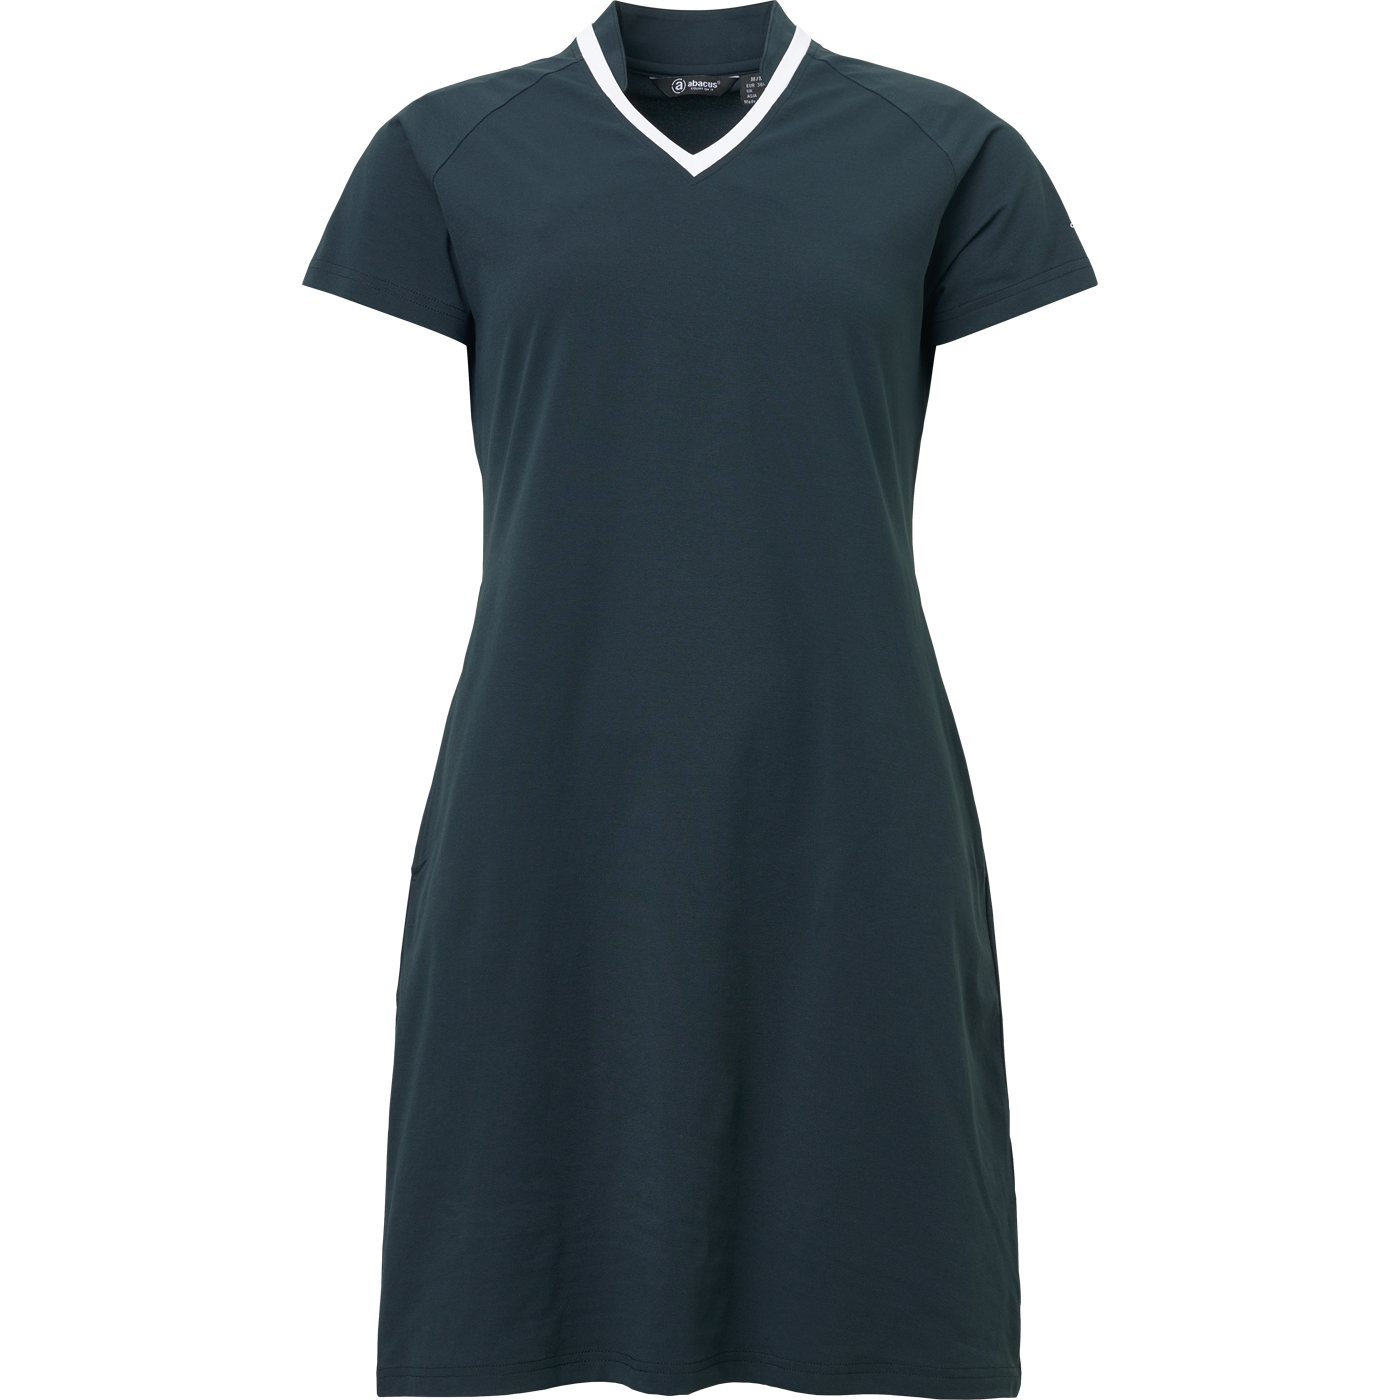 Lds Ives dress - navy in the group WOMEN / All clothing at Abacus Sportswear (2760300)